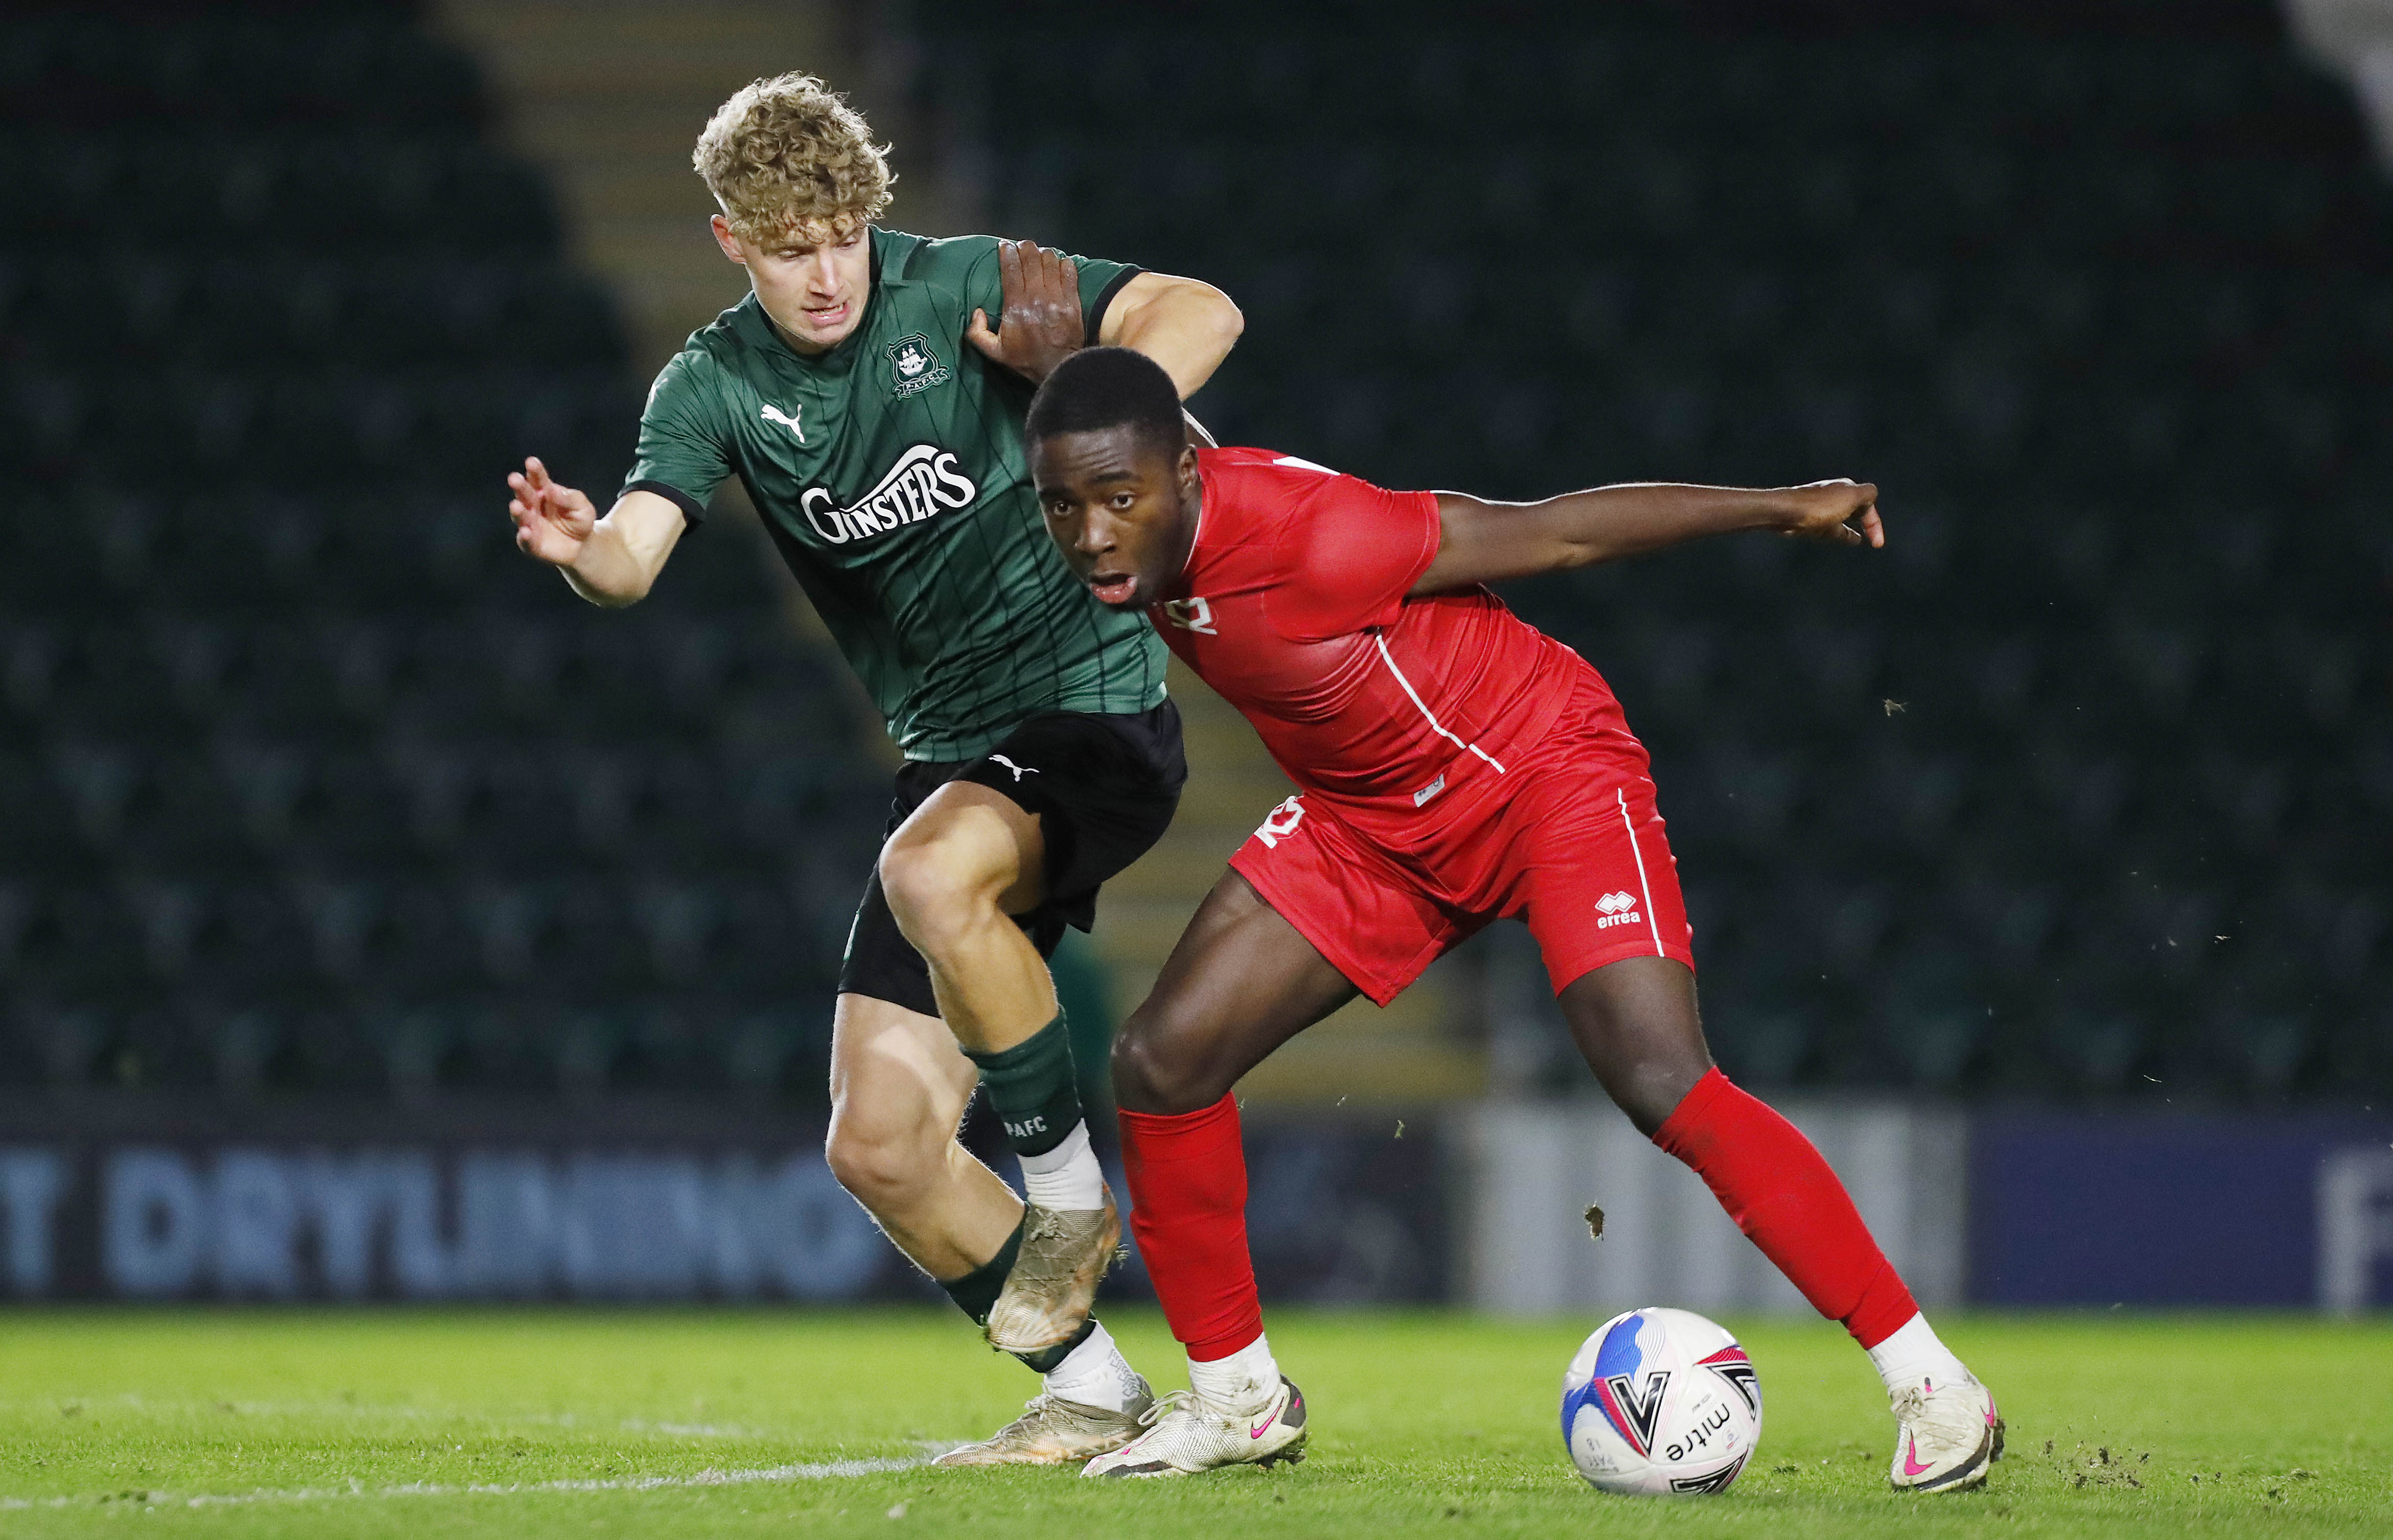 Brandon Pursall in FA Youth Cup action